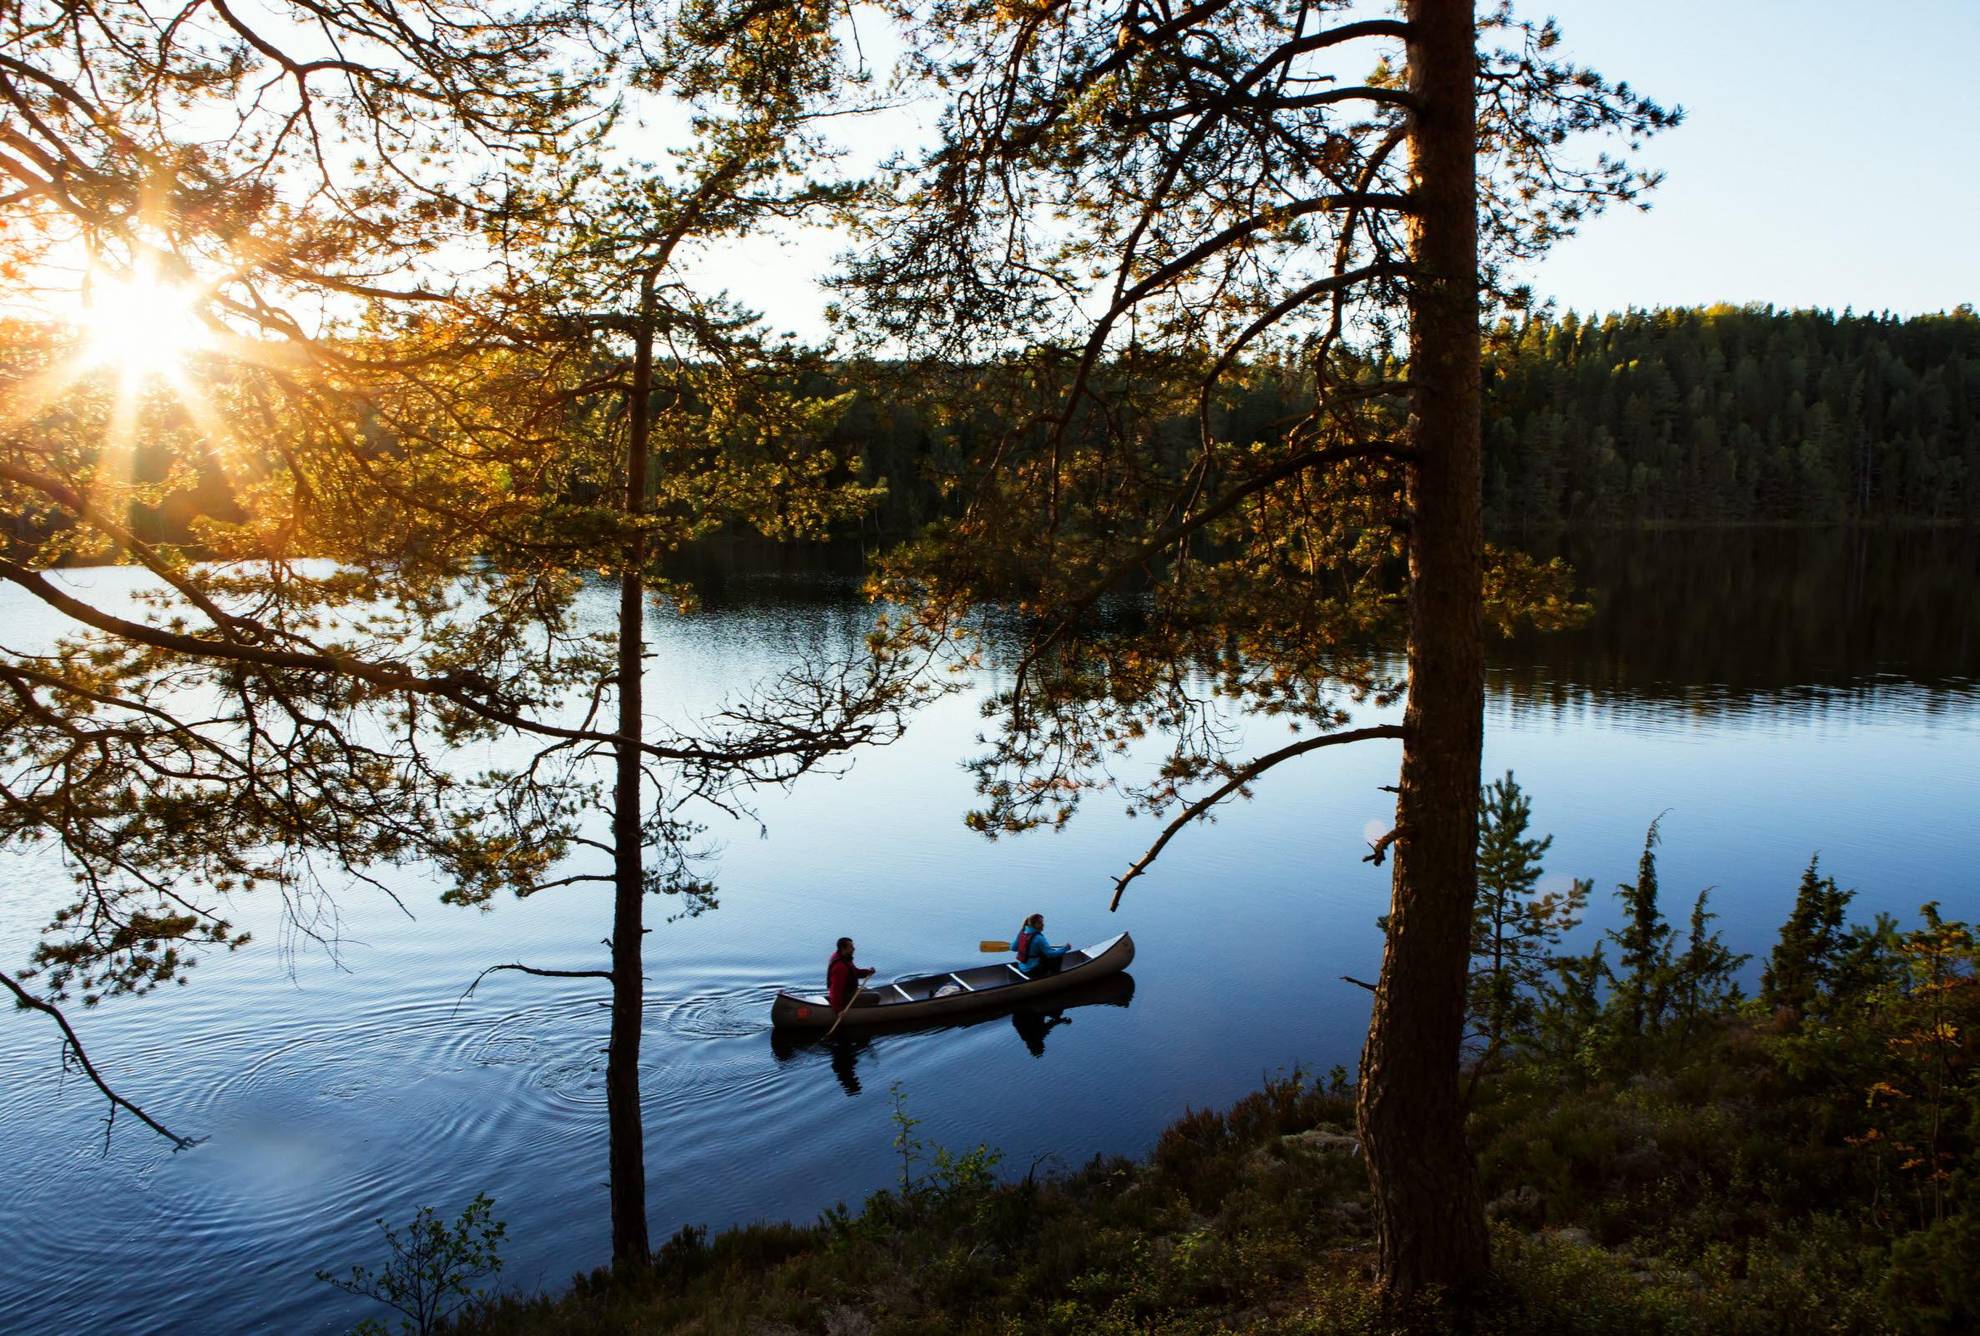 A canoe with two people on a calm lake surrounded by forest, with the sun setting between the trees.